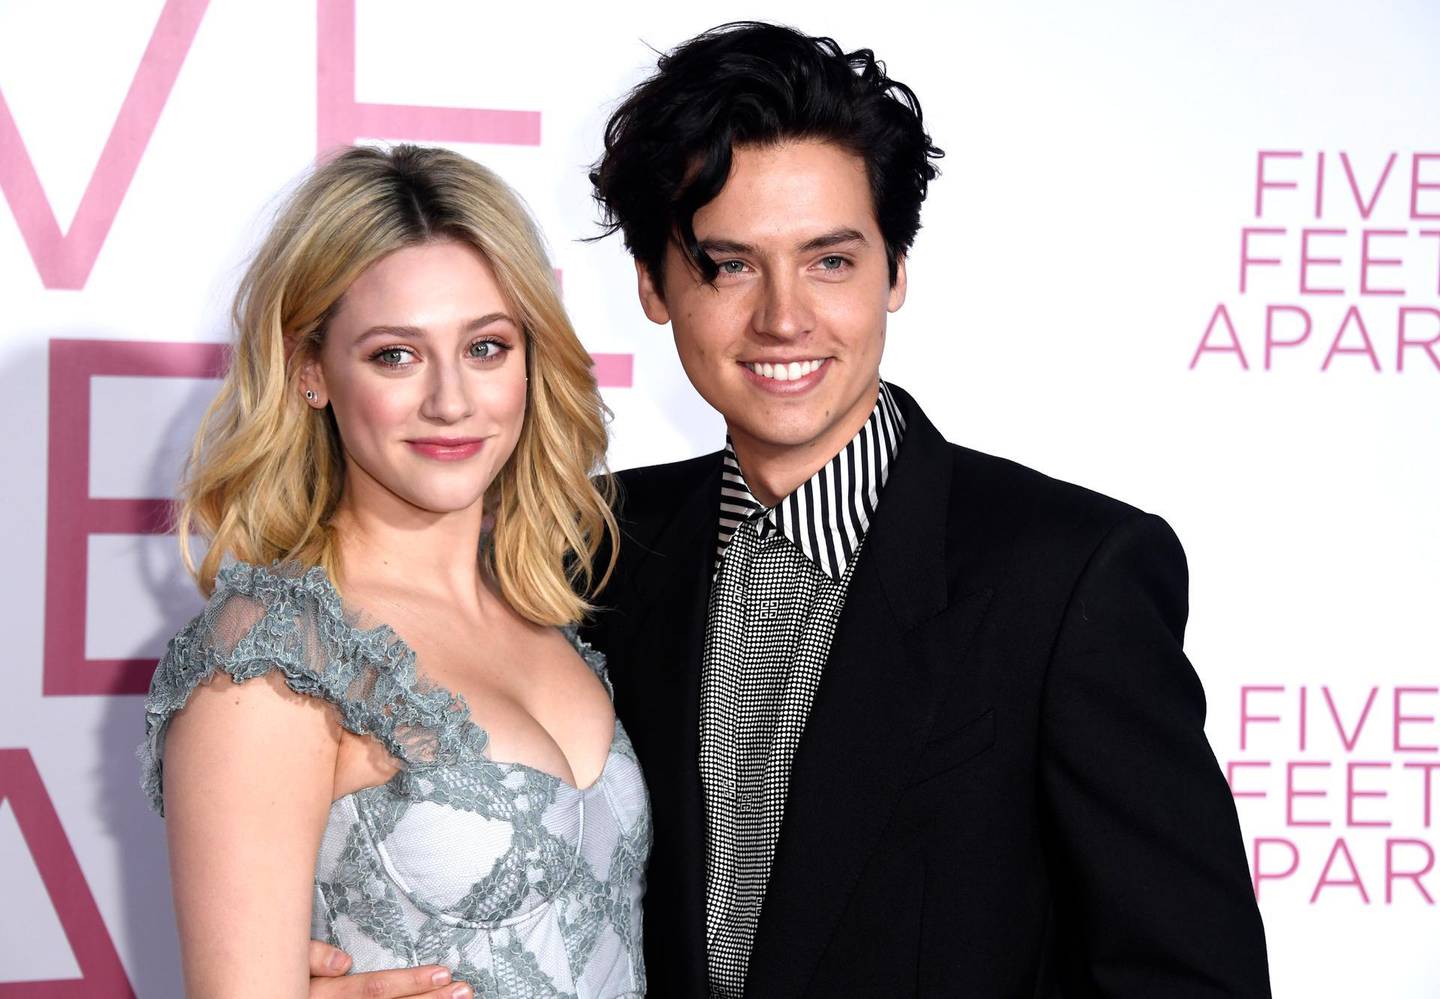 LOS ANGELES, CALIFORNIA - MARCH 07: Lili Reinhart and Cole Sprouse attend the Premiere Of Lionsgate's "Five Feet Apart" at Fox Bruin Theatre on March 07, 2019 in Los Angeles, California.   Frazer Harrison/Getty Images/AFP